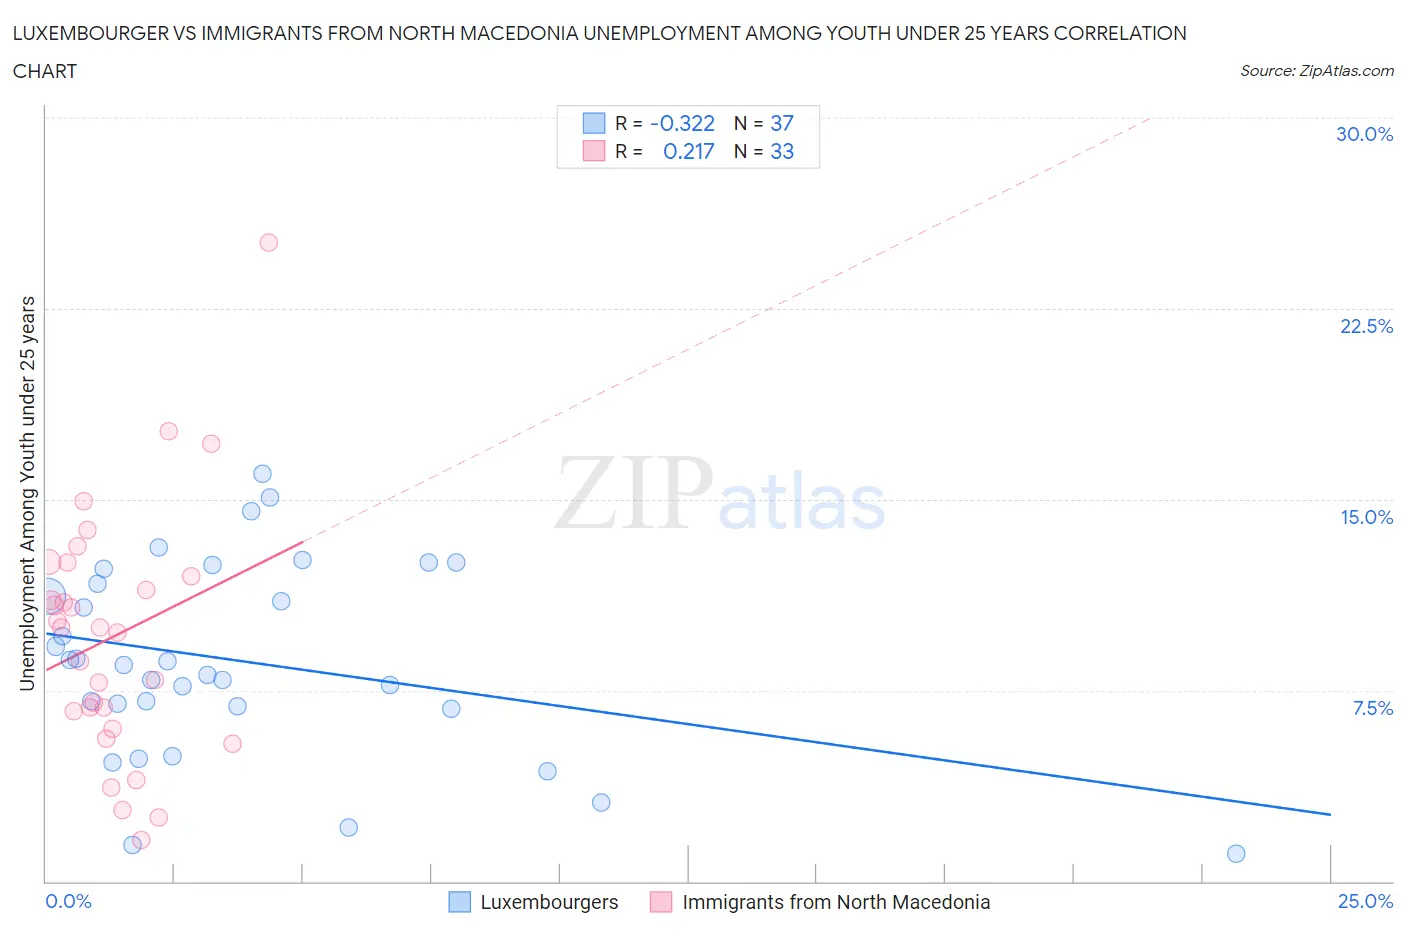 Luxembourger vs Immigrants from North Macedonia Unemployment Among Youth under 25 years